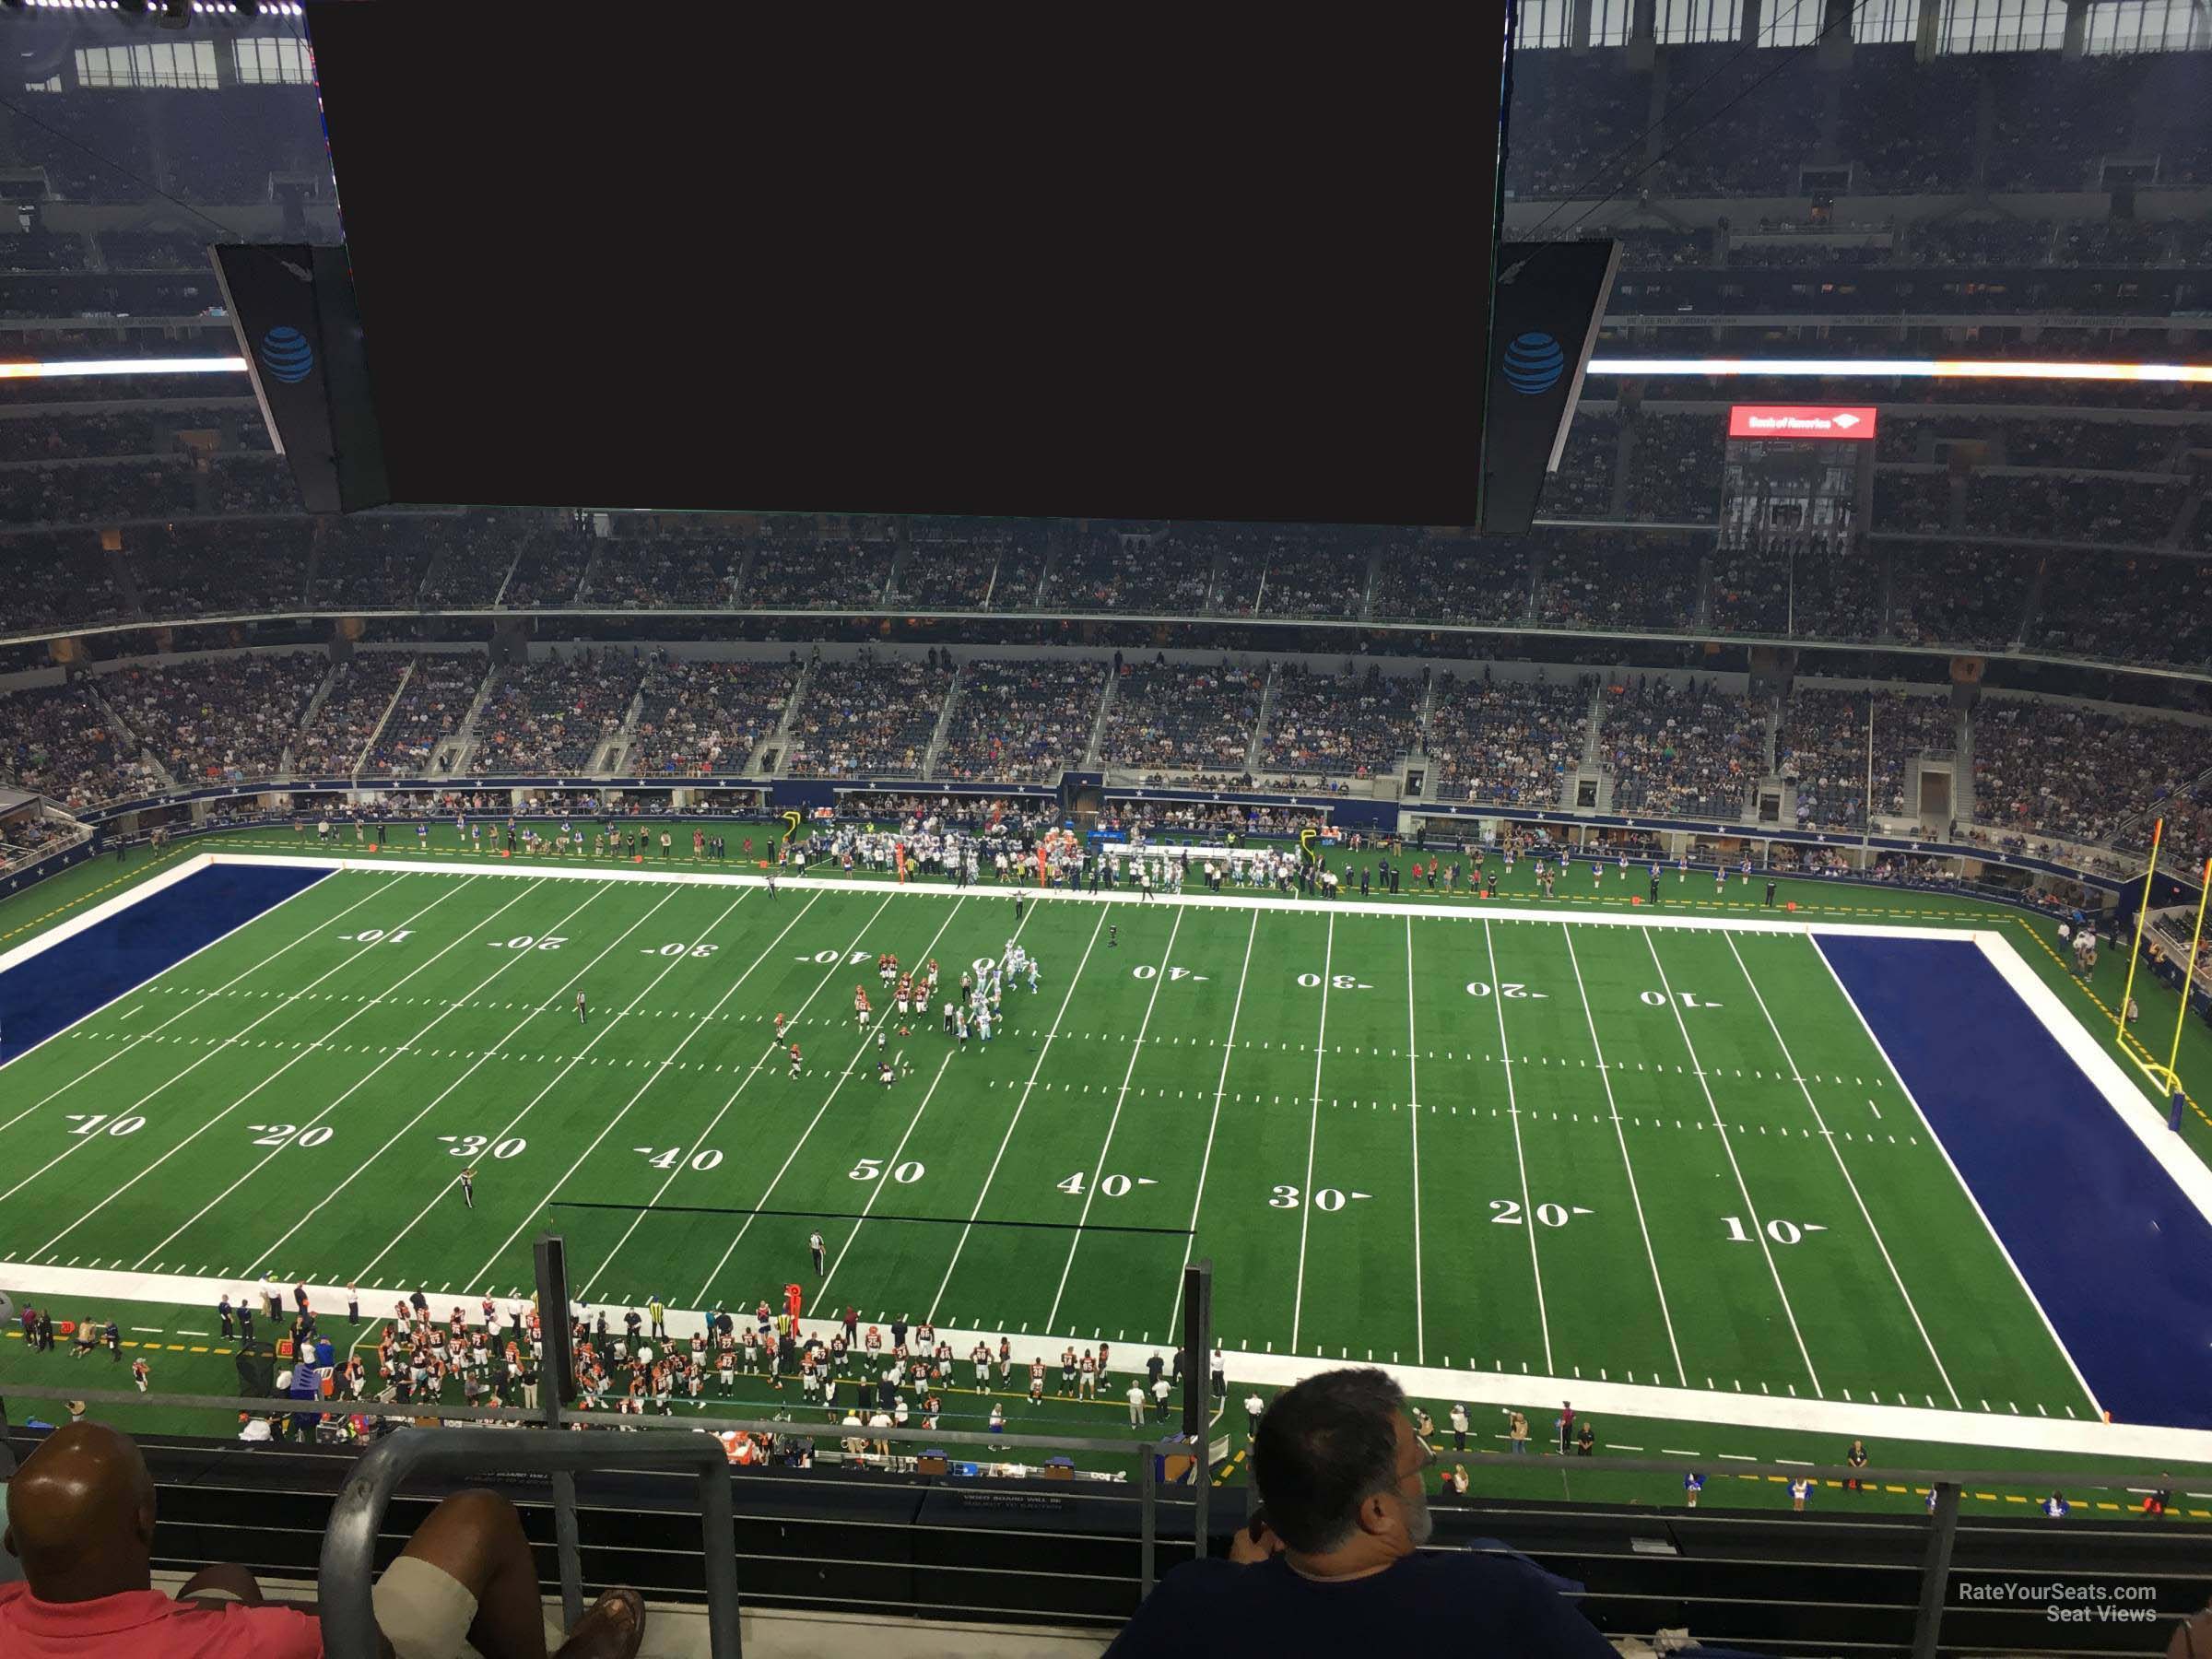 section 439, row 4 seat view  for football - at&t stadium (cowboys stadium)